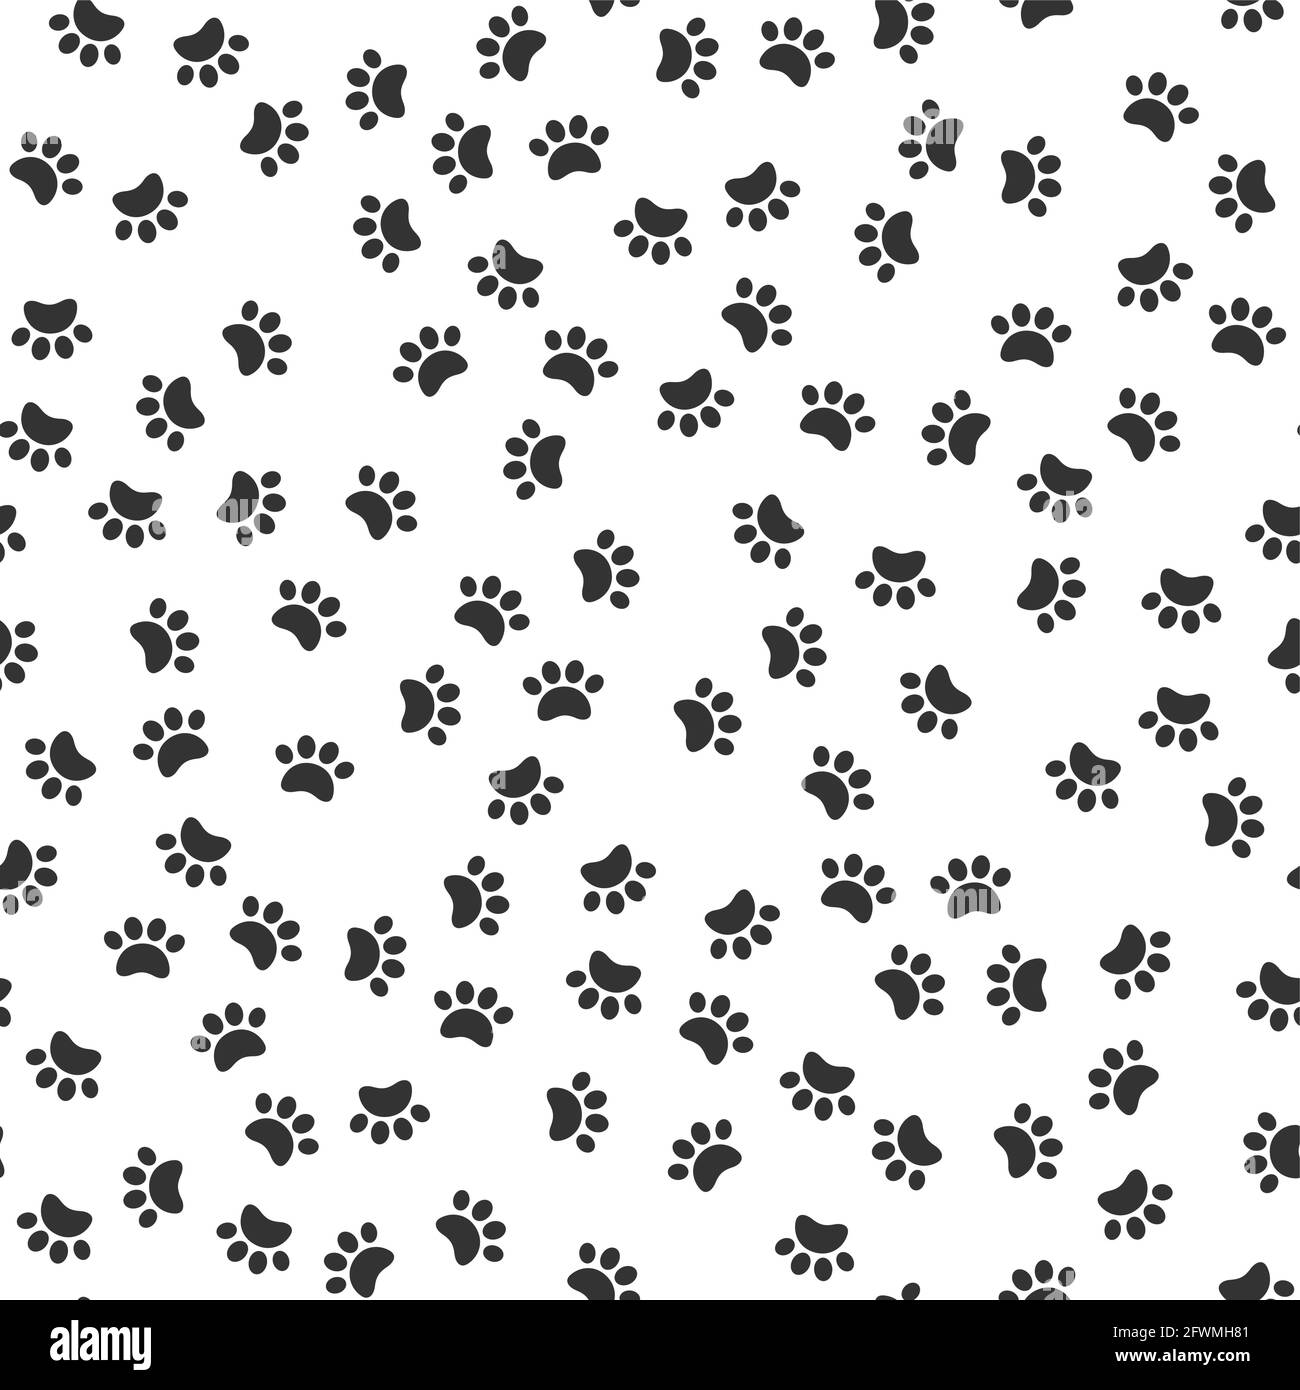 Cat Paw Print Wallpapers  Top Free Cat Paw Print Backgrounds   WallpaperAccess